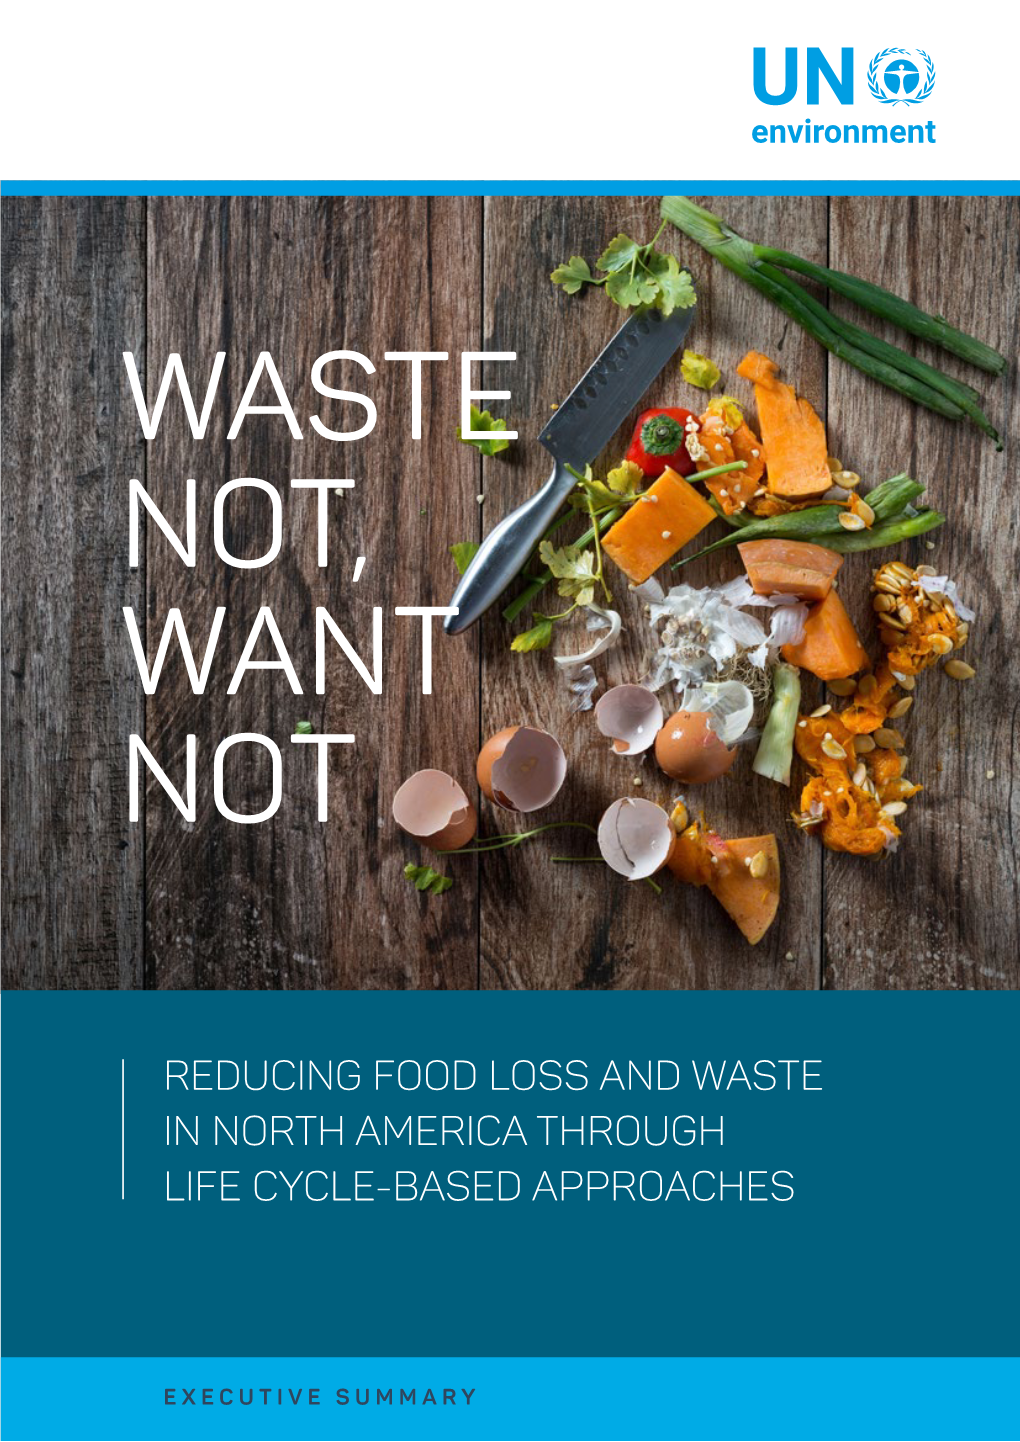 Reducing Food Loss and Waste in North America Through Life Cycle-Based Approaches